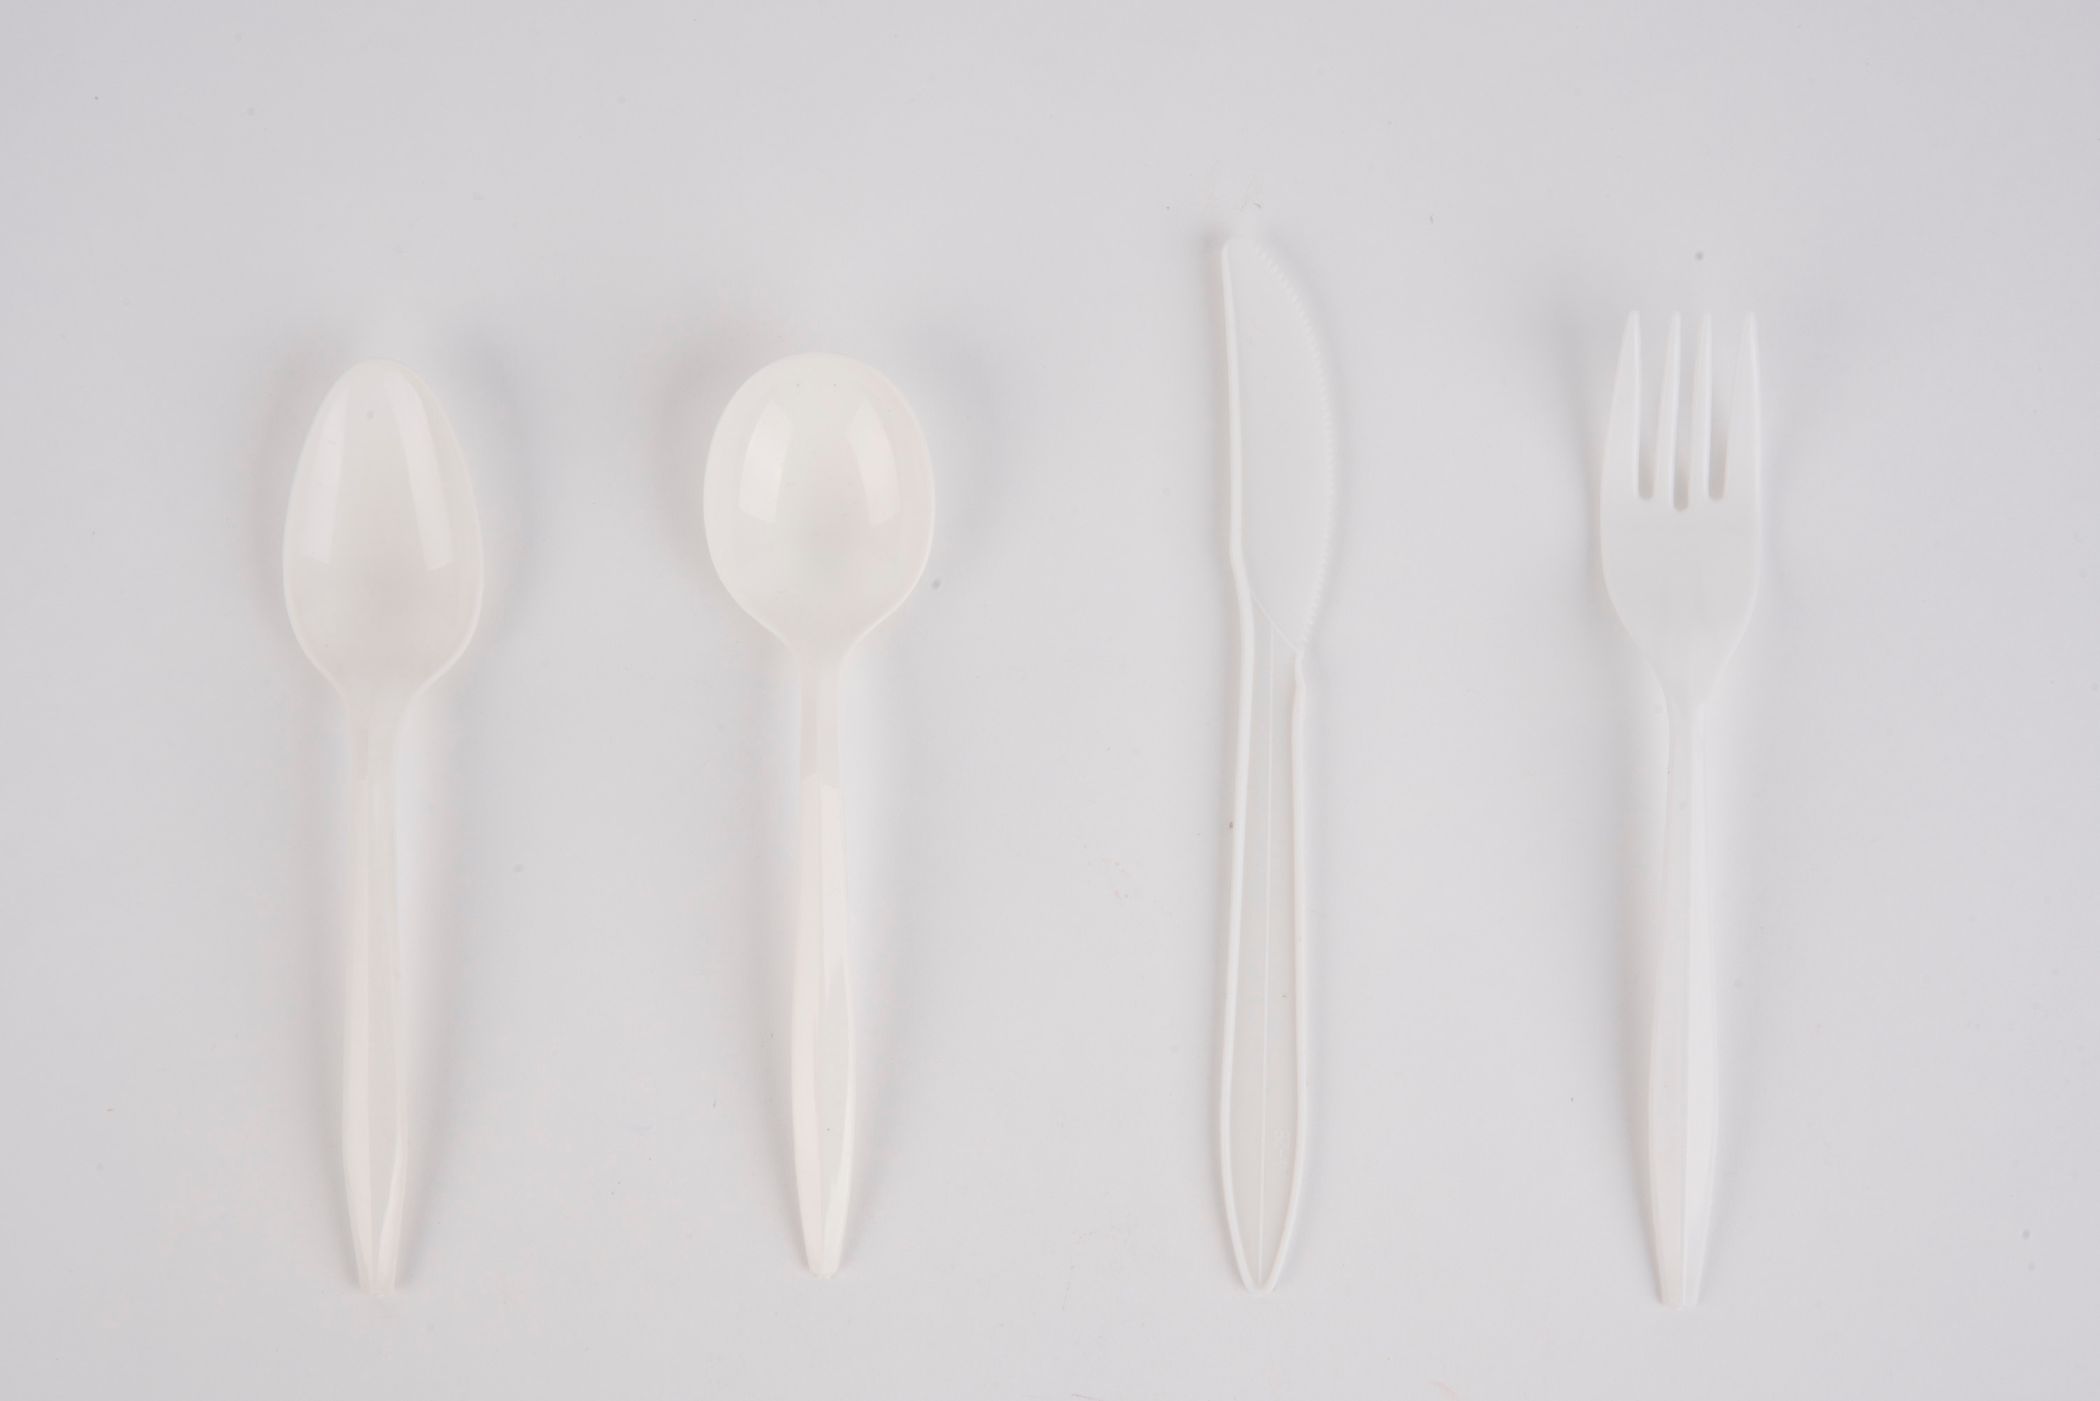 Forks, spoons, and knives by Kari-Out